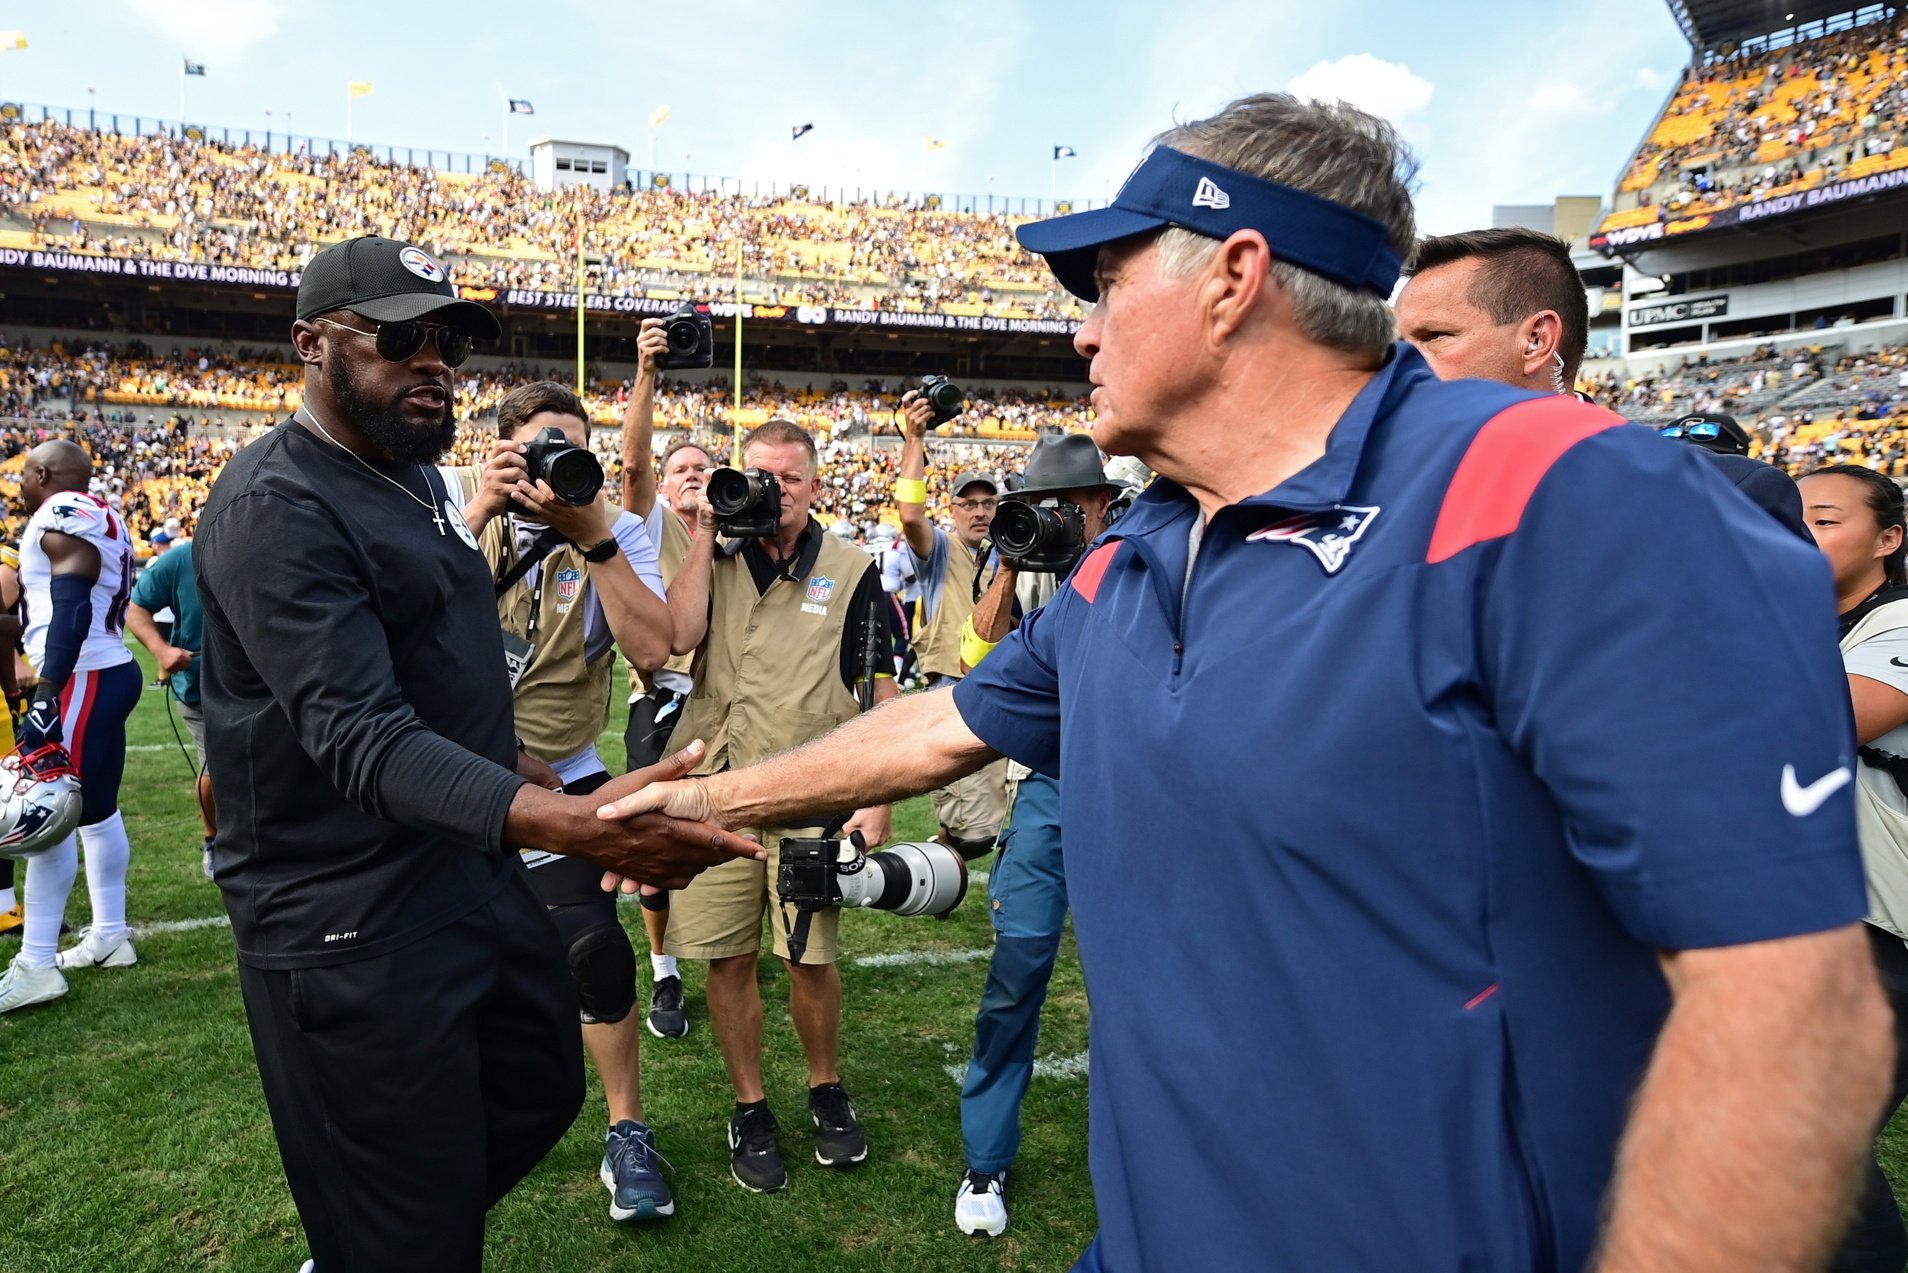 New England Patriots head coach Bill Belichick and Pittsburgh Steelers HC Mike Tomlin shake hands after a game.